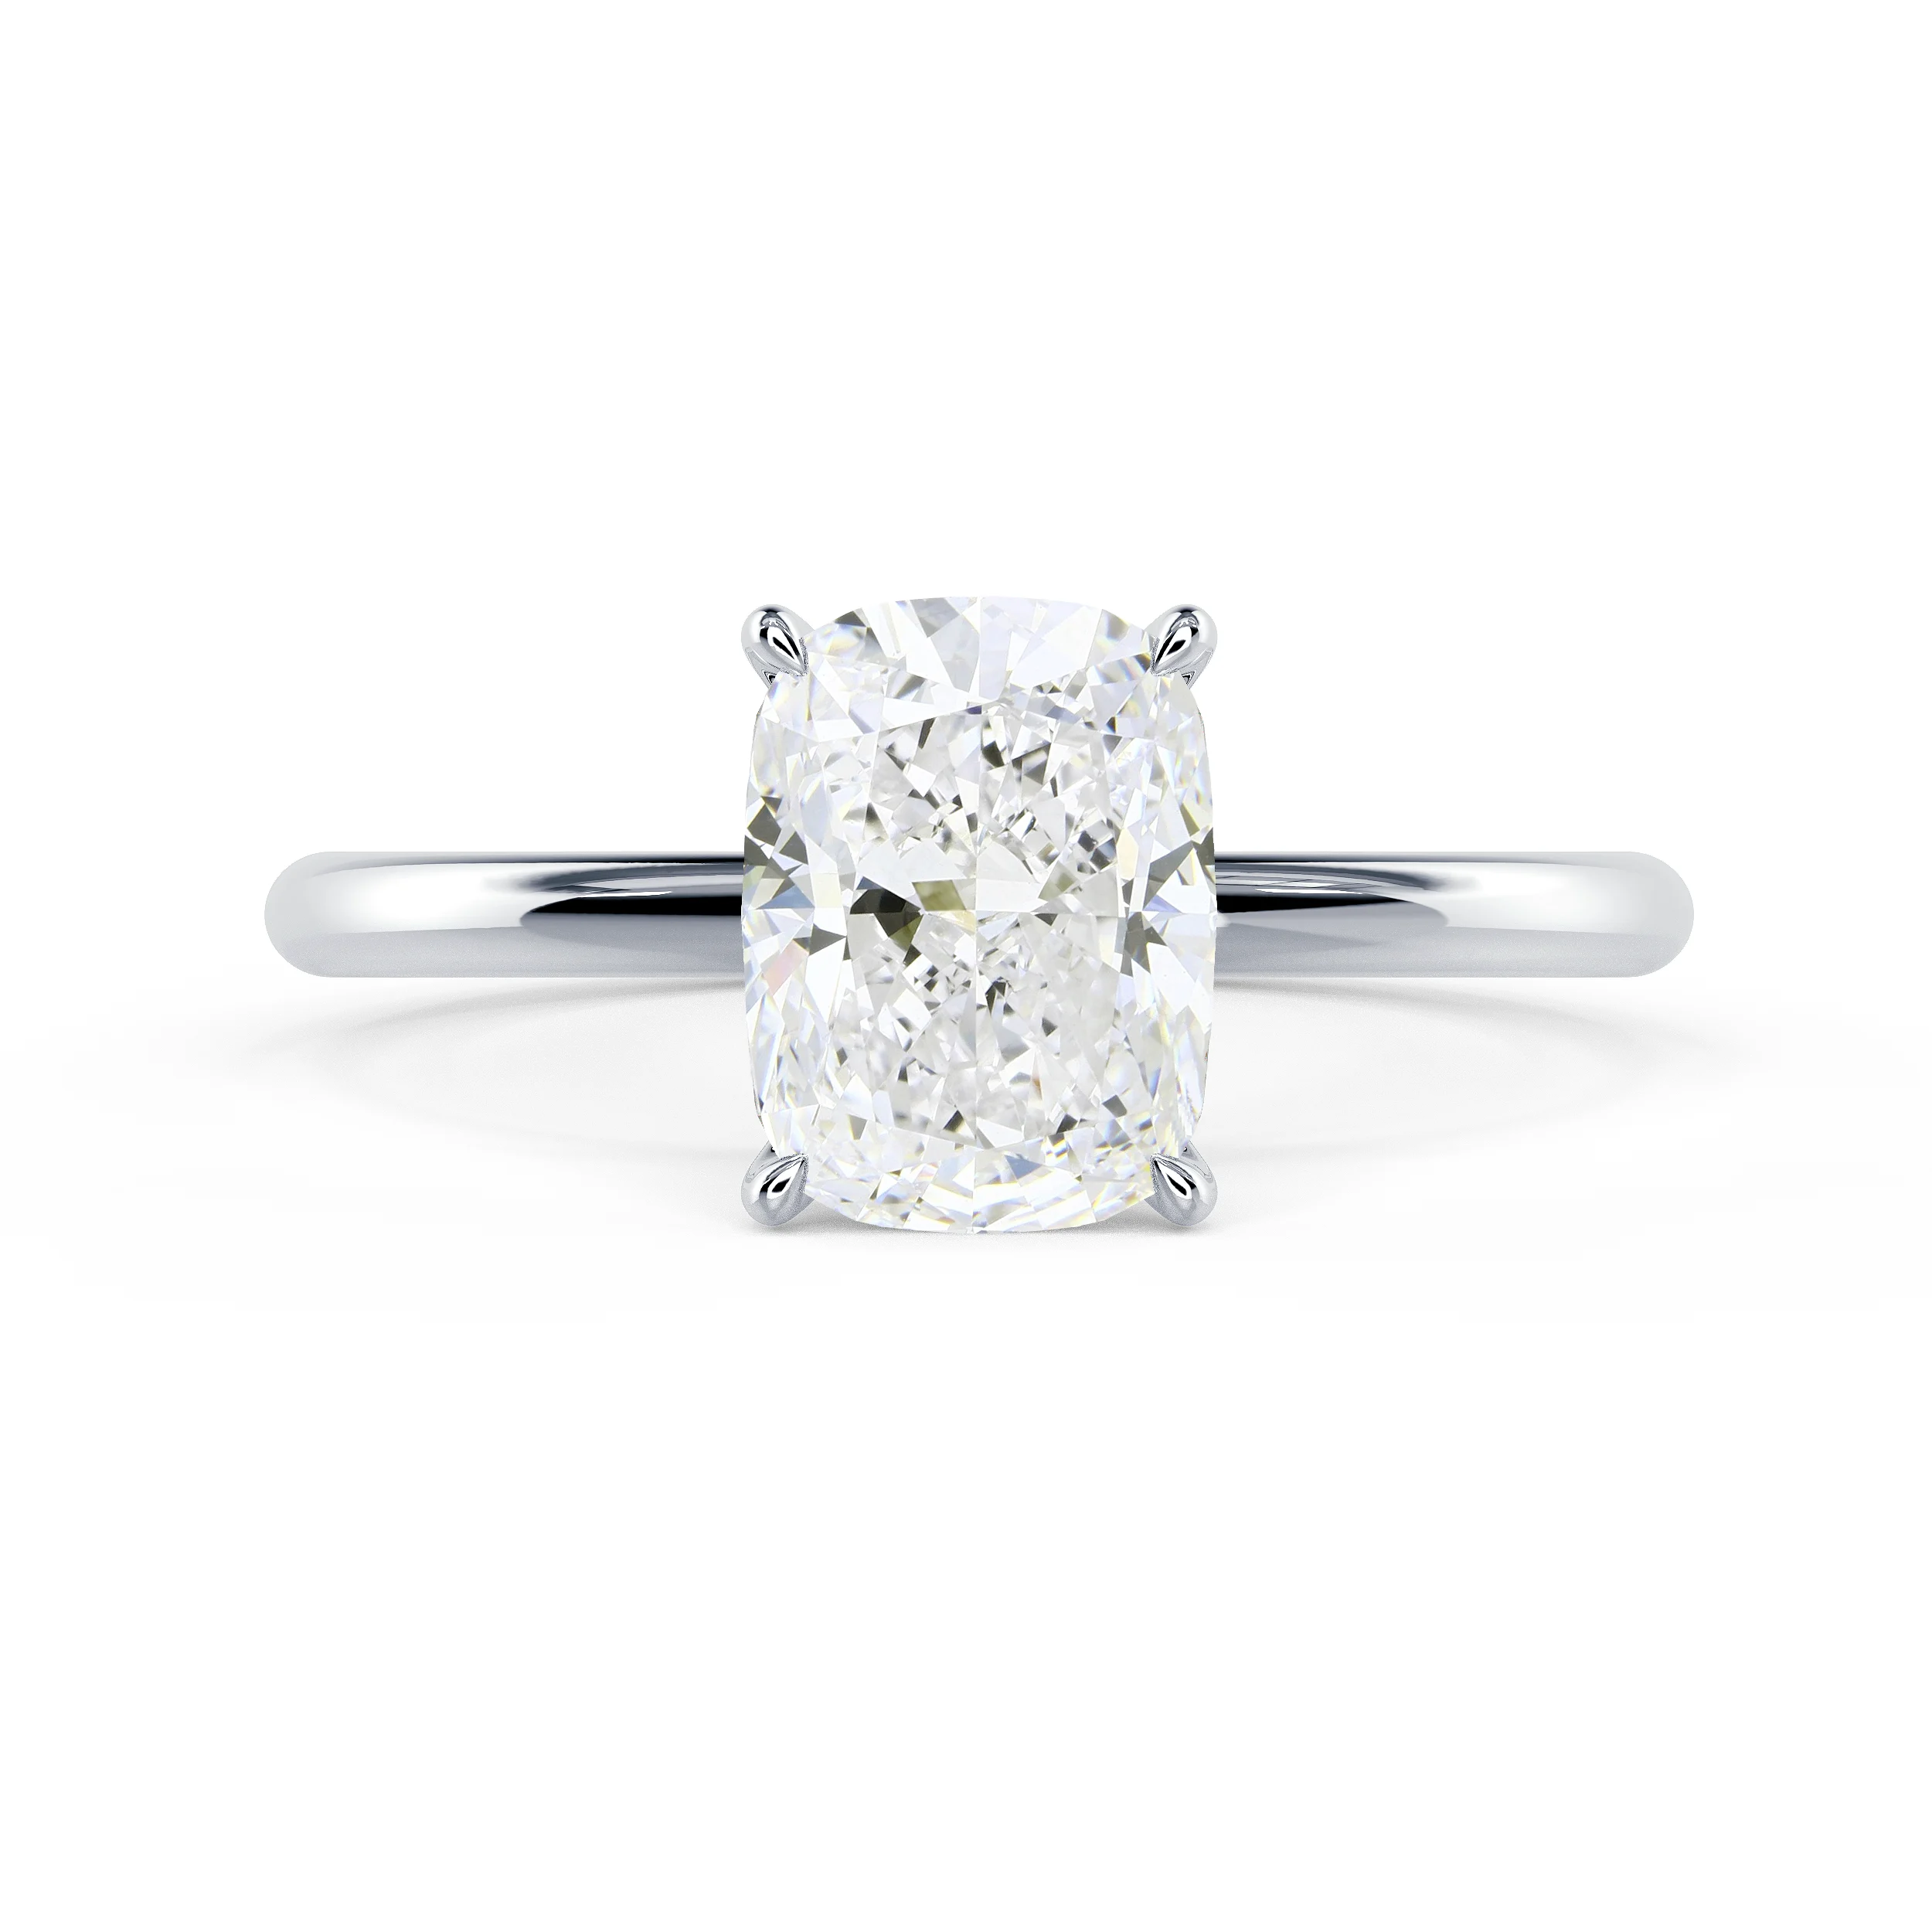 White Gold Cushion Petite Four Prong Solitaire Diamond Engagement Ring featuring Diamonds (Main View)